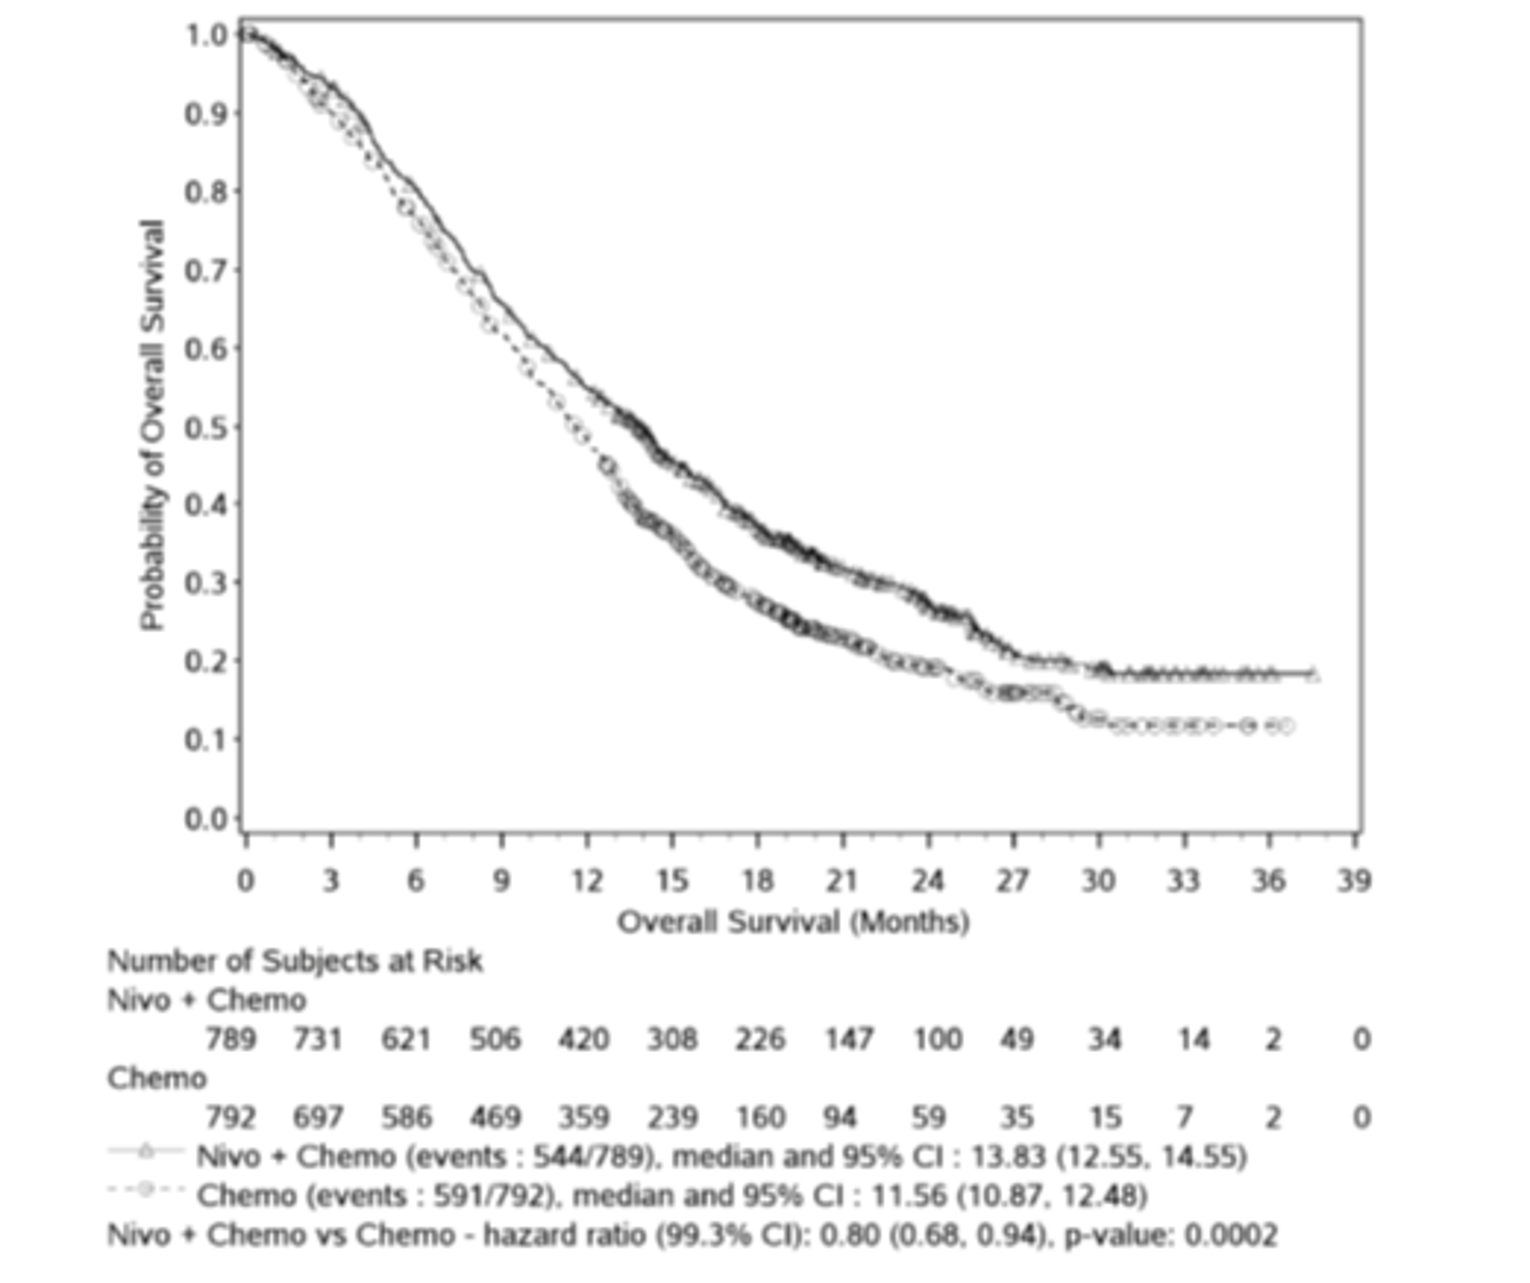 In this Kaplan-Meier analysis of OS among all randomized patients in the CheckMate-649 trial, approximately 50% of patients receiving chemotherapy had died by 12 months, approximately 75% had died by 18 months, and approximately 85% had died by 30 months. In contrast, approximately 50% and 75% of patients receiving nivolumab plus chemotherapy had died by 14 months and 24 months, respectively, with only small decreases in survival probability thereafter. Median time to death was 13.83 (95% CI, 12.55 to 14.55) months among patients receiving nivolumab plus chemotherapy and 11.56 (95% CI, 10.87 to 12.48) months among patients receiving chemotherapy (HR 0.80; 99.3% CI, 0.68 to 0.94; P = 0.0002). The number of at-risk patients receiving nivolumab plus chemotherapy at 0, 3, 6, 9, 12, 15, 18, 21, 24, 27, 30, 33, 36, and 39 months was 789, 731, 621, 506, 420, 308, 226, 147, 100, 49, 34, 14, 2, and 0, respectively. The number of at-risk patients receiving chemotherapy at 0, 3, 6, 9, 12, 15, 18, 21, 24, 27, 30, 33, 36, and 39 months was 792, 697, 586, 469, 359, 239, 160, 94, 59, 35, 15, 7, 2, and 0, respectively.